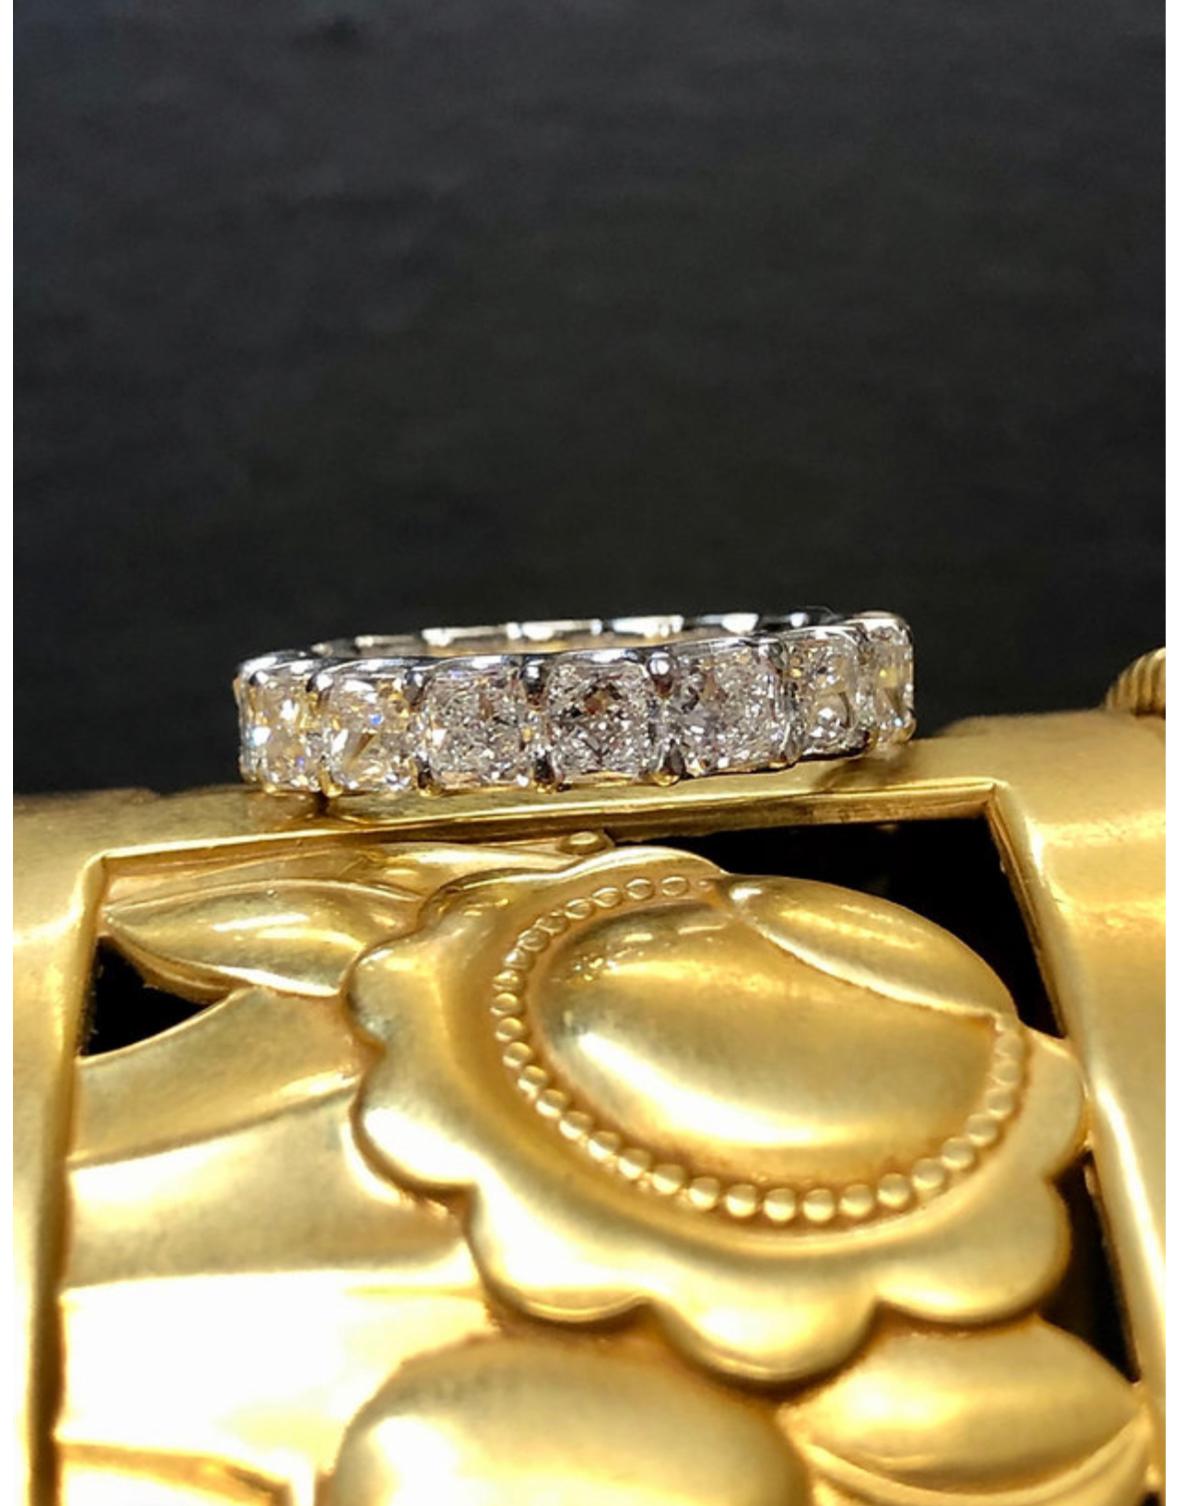 A classic eternity band done in platinum and set with 18 radiant cut diamonds being G-H color and Vs1-2 in clarity. Total approximate diamond weight is 5.40cttw.

Dimensions/Weight
4.5mm wide. Size 6 3/4. Weighs 3.6dwt.

Condition
All stones are